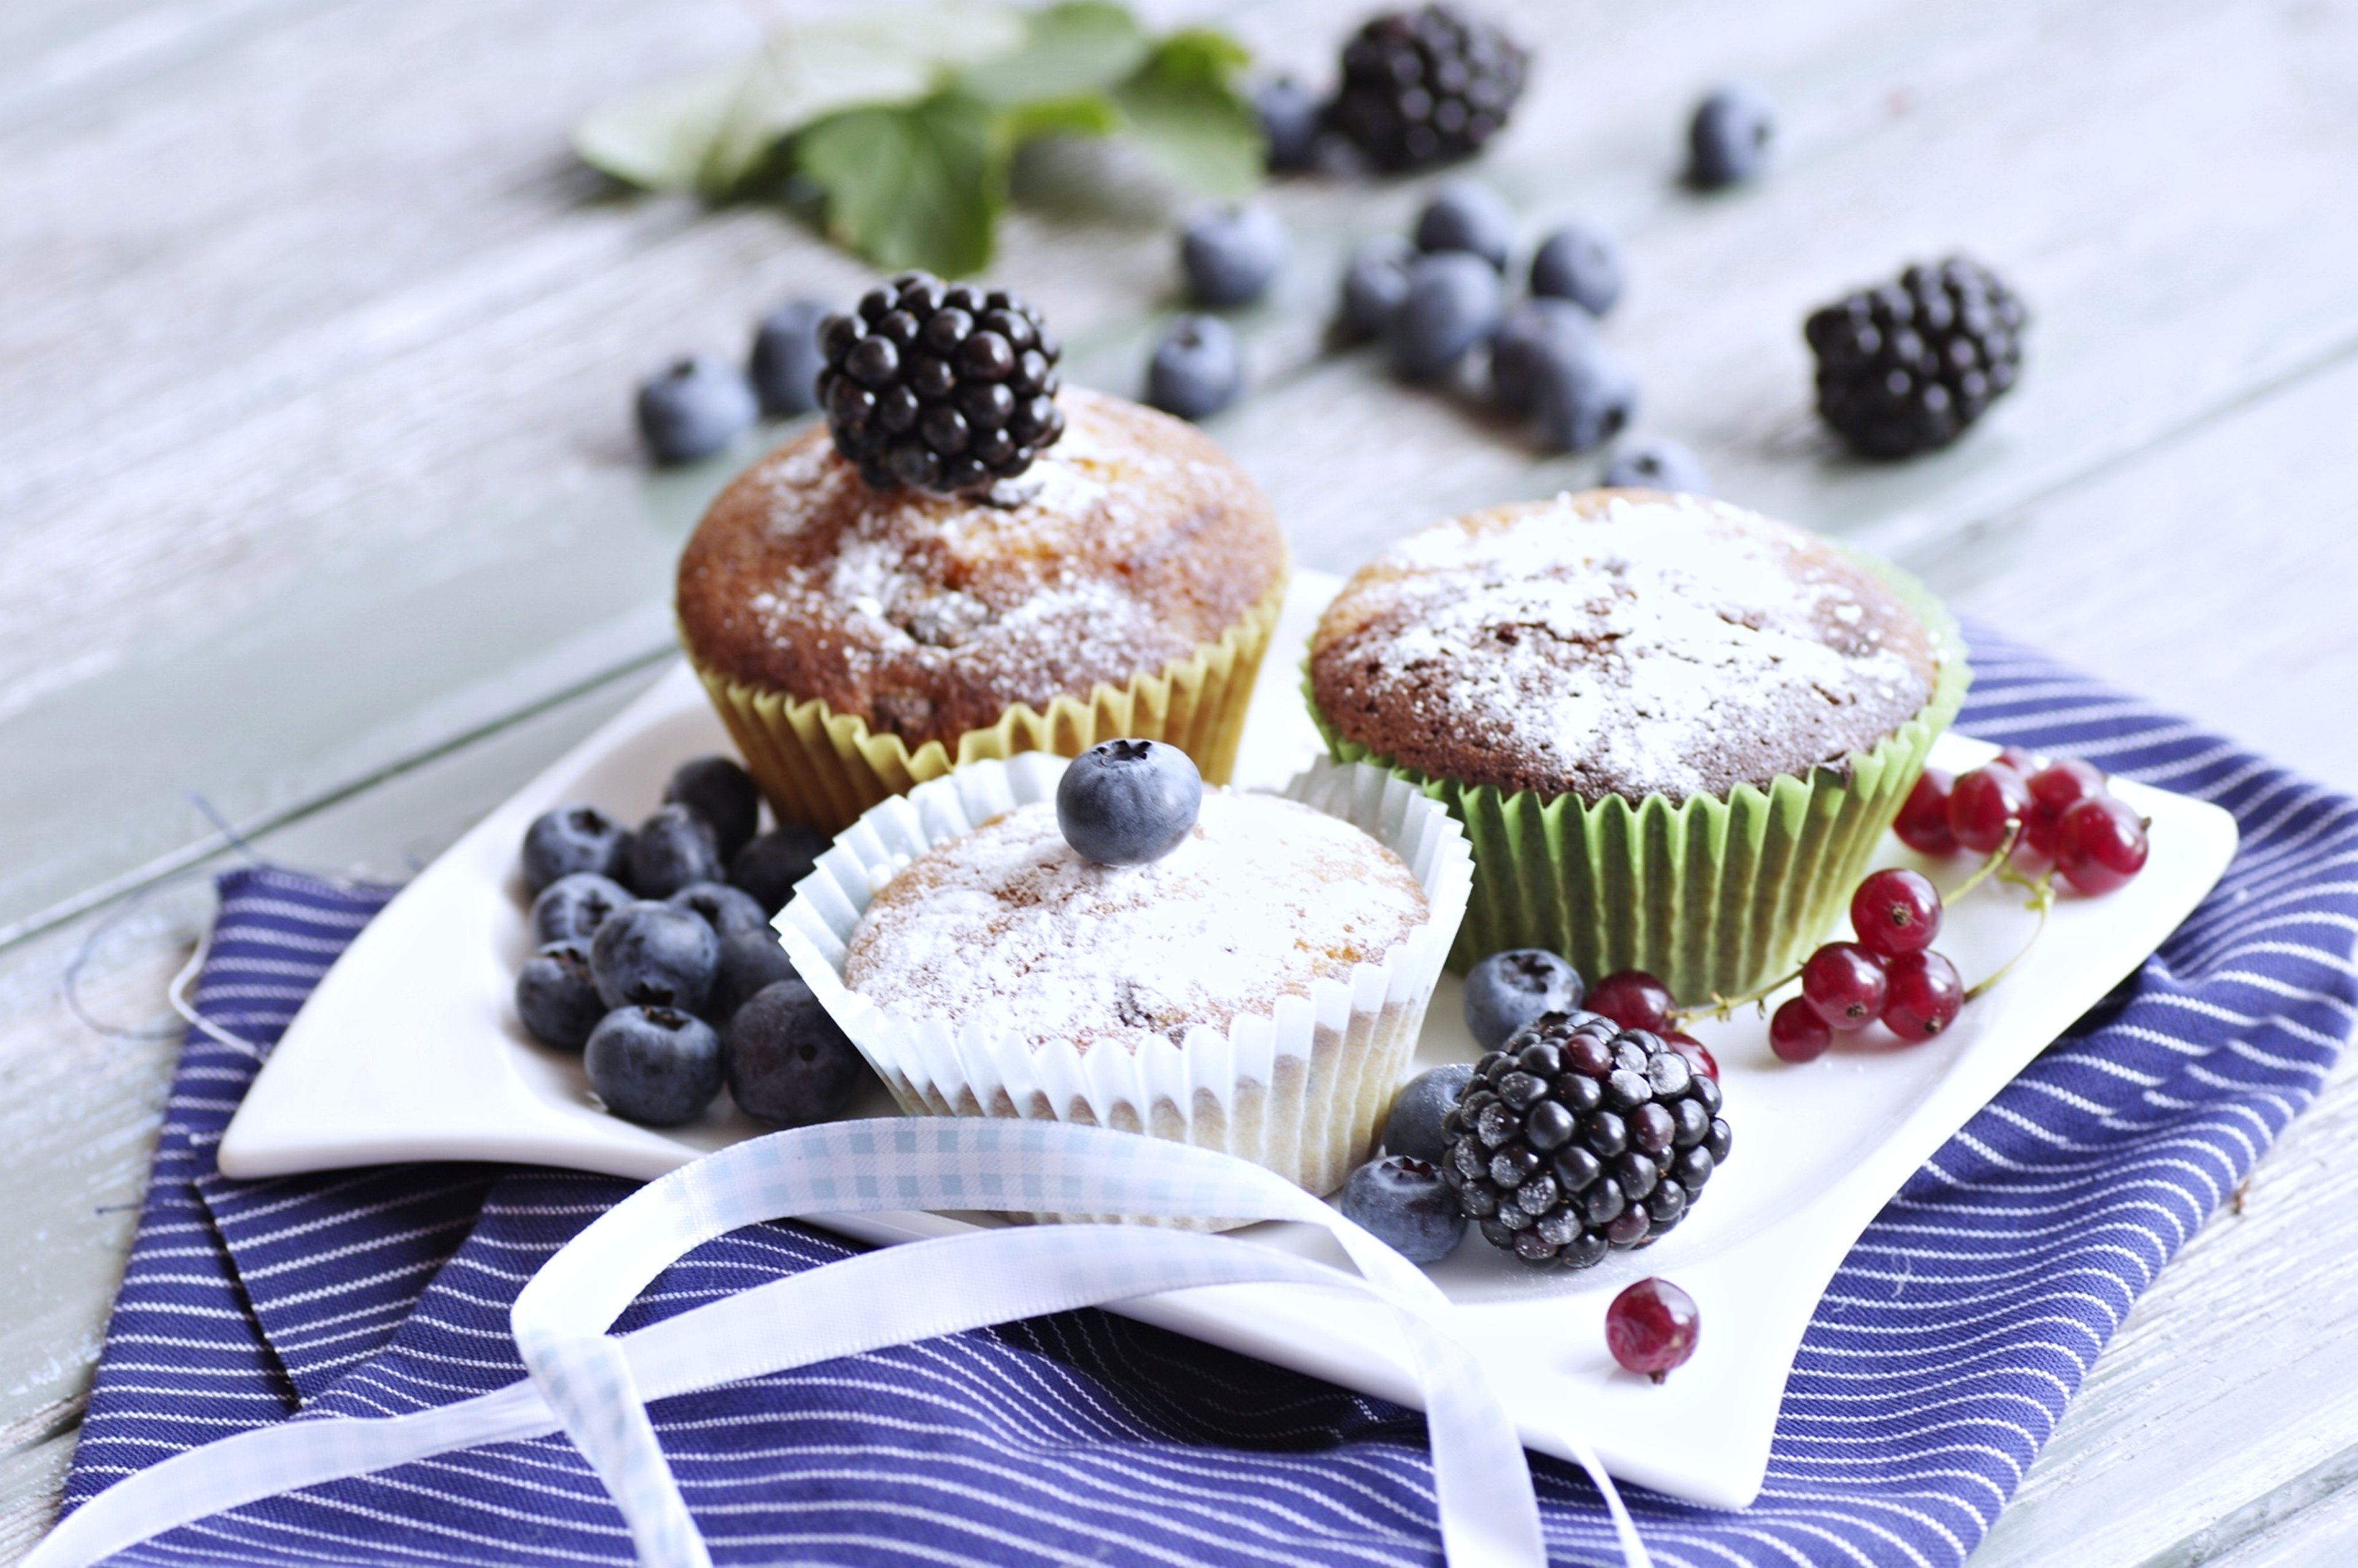 cakes, Blueberry, Fruit, Refreshments, Sweets, Food, Delicious, Madeleine Wallpaper